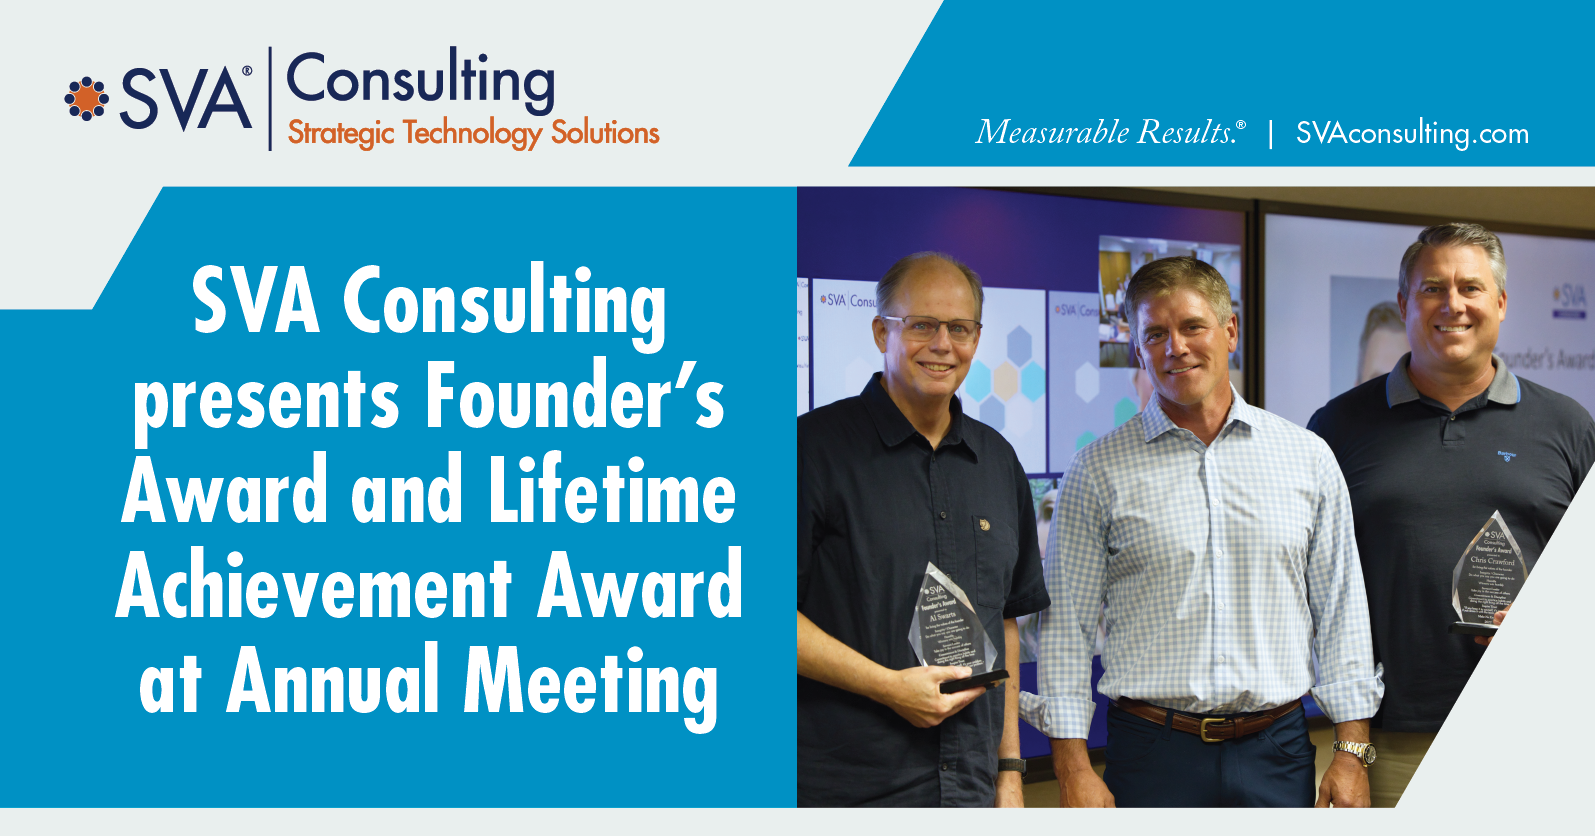 sva-consulting-presents-founders-award-and-lifetime-achievement-award-at-annual-meeting